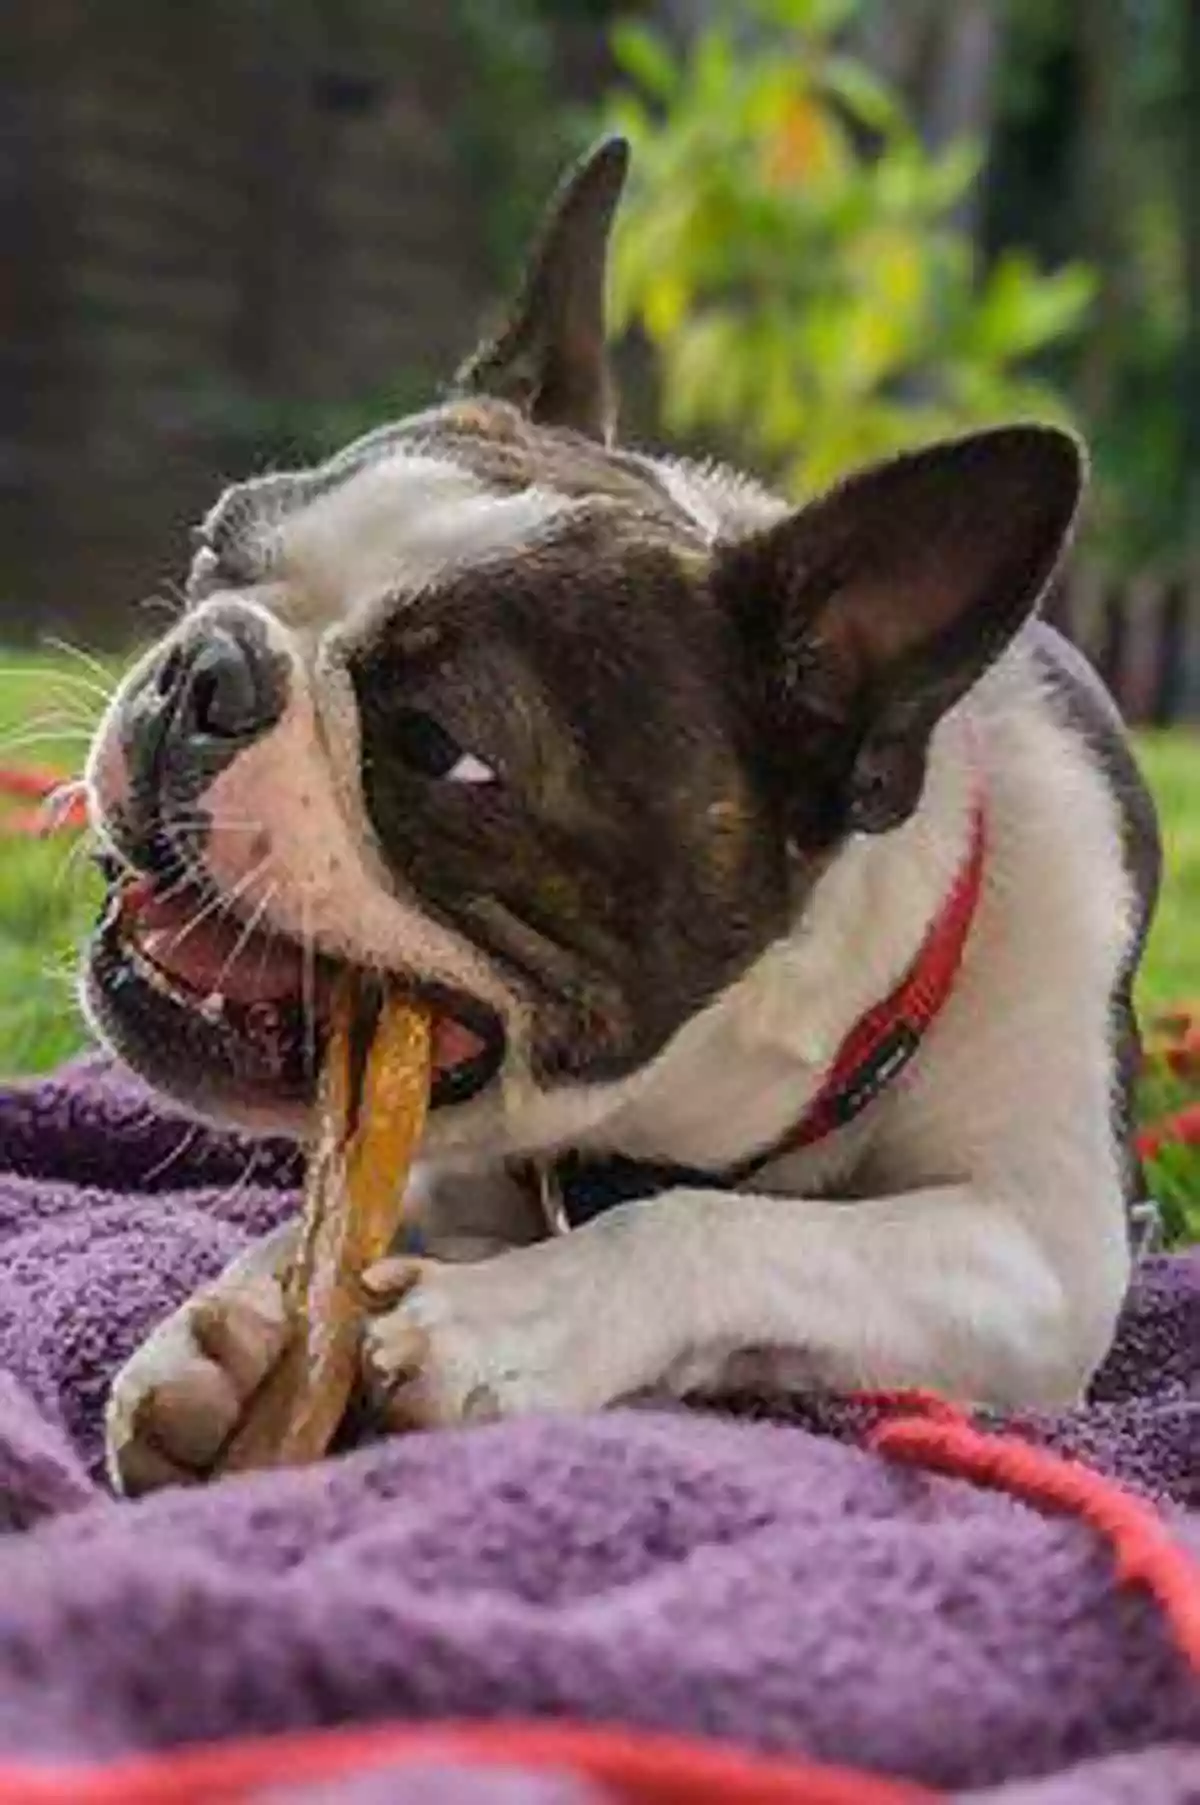 Prevent Dogs From Chewing – What You Need to Know